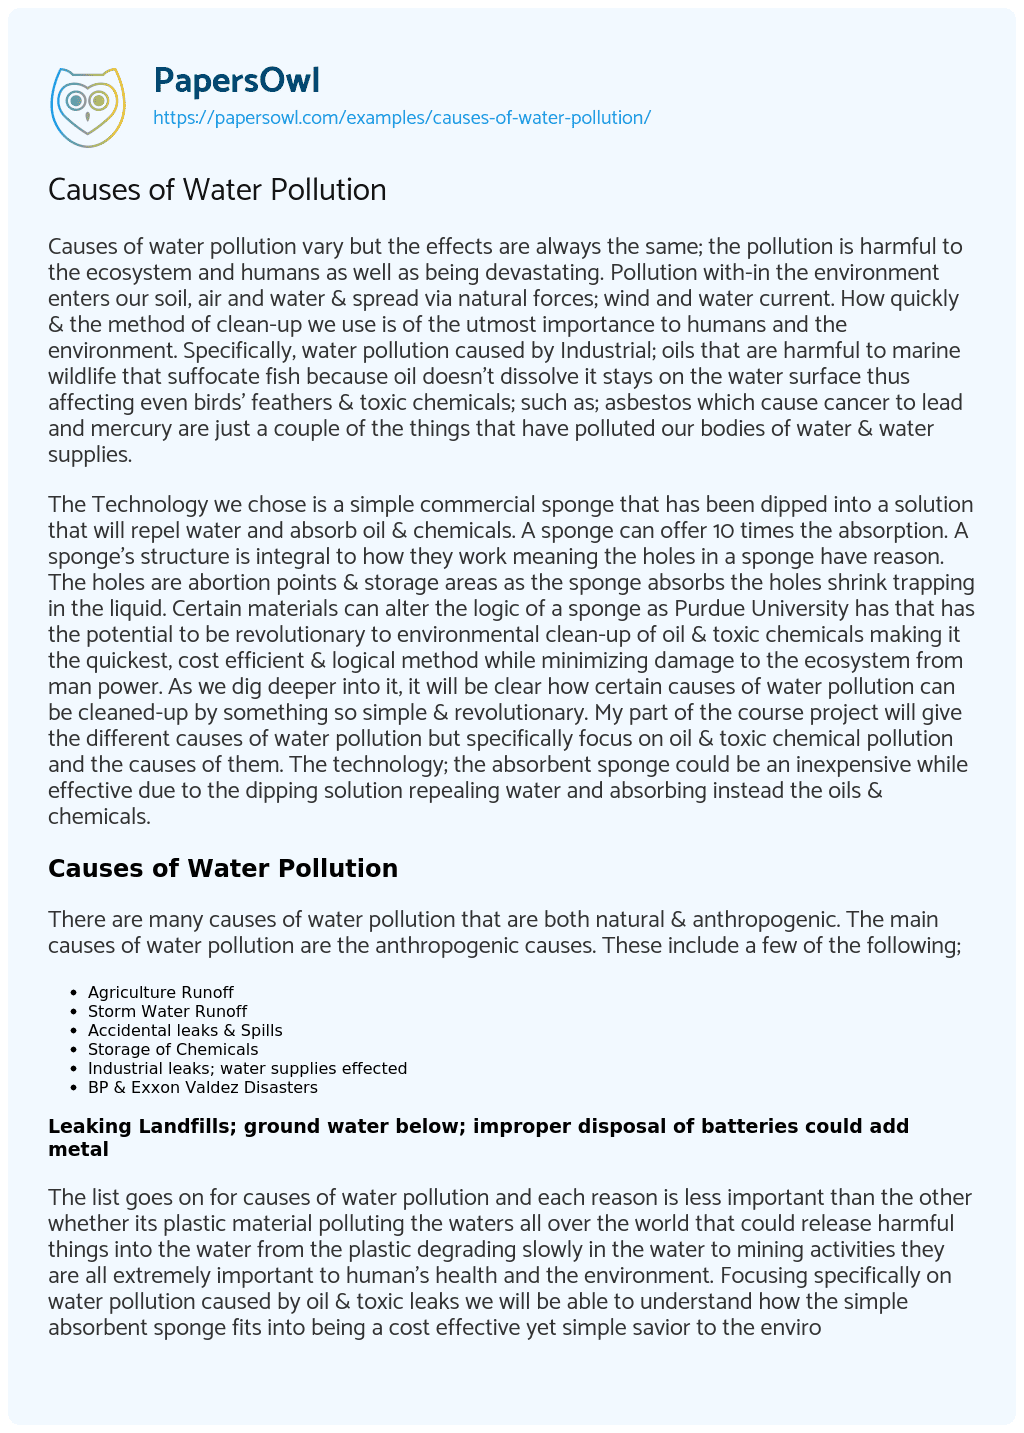 Causes of Water Pollution essay